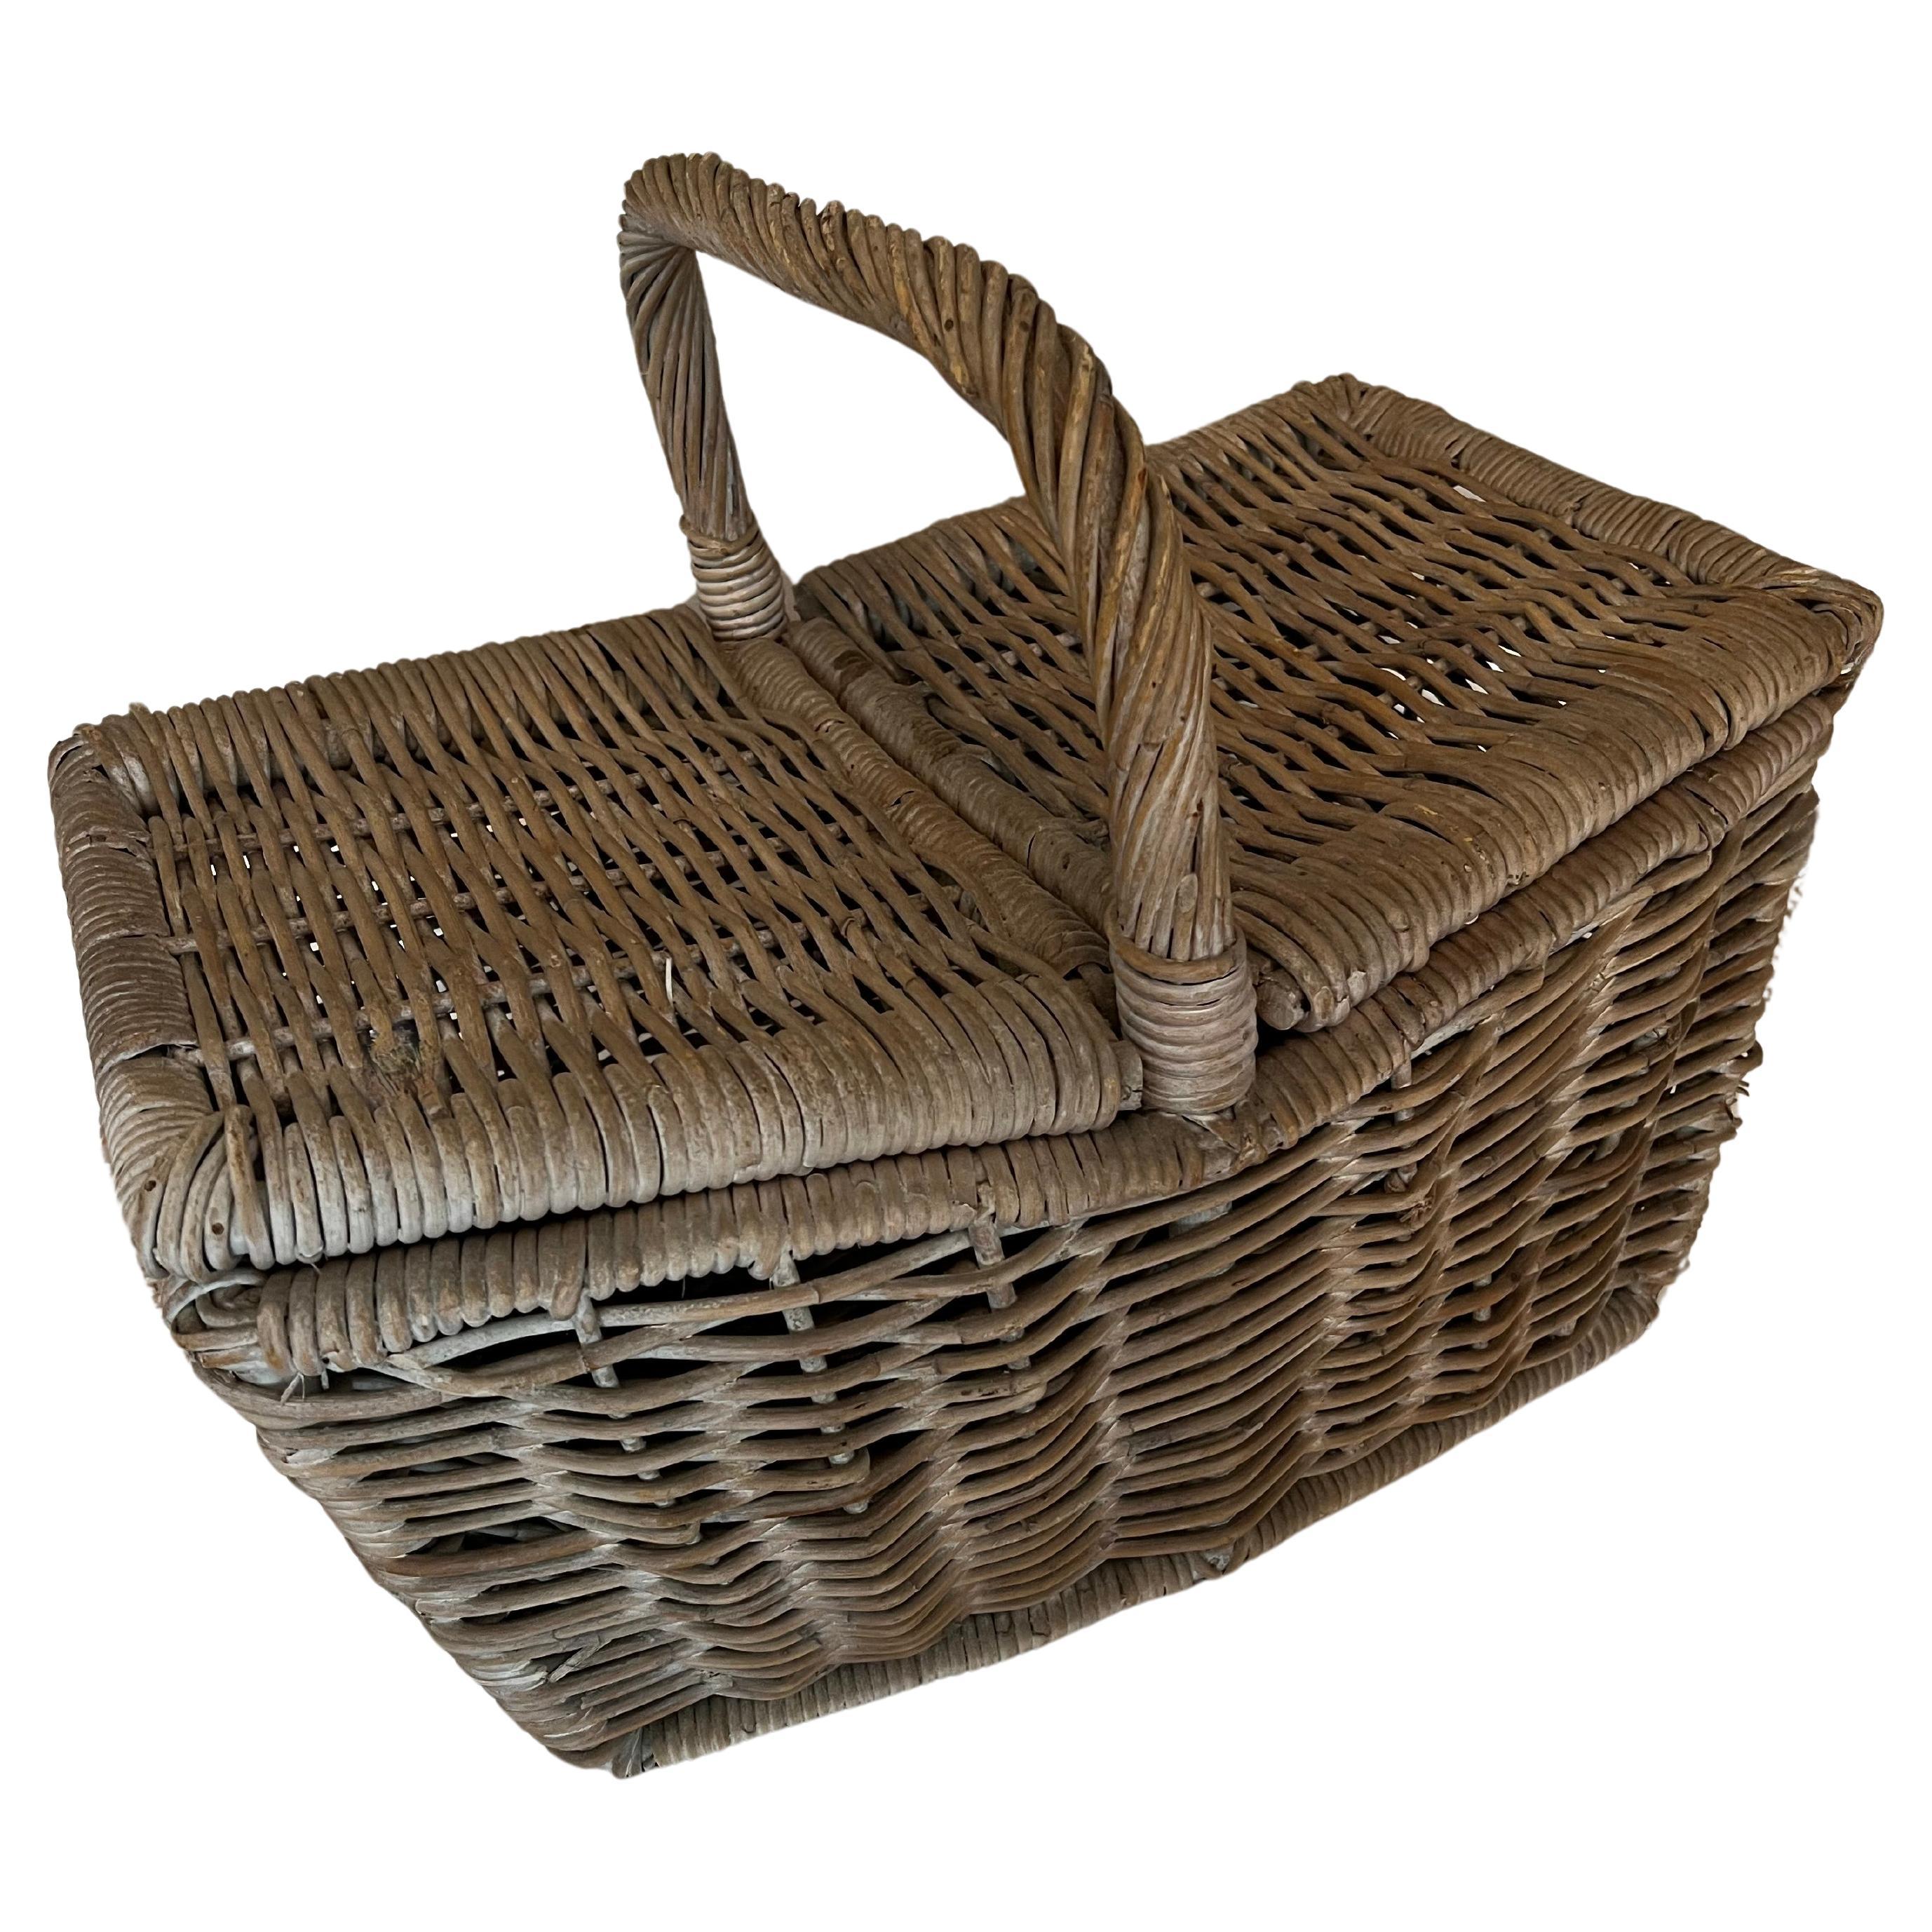 A wonderful Picnic Basket - Woven of heavy rattan  - a center opening with duo sides for easy access.  A spacious basket for a hearty meal, bottle of wine and picnic accessories.

A lovely practical piece, which also doubles as a handsome decorative